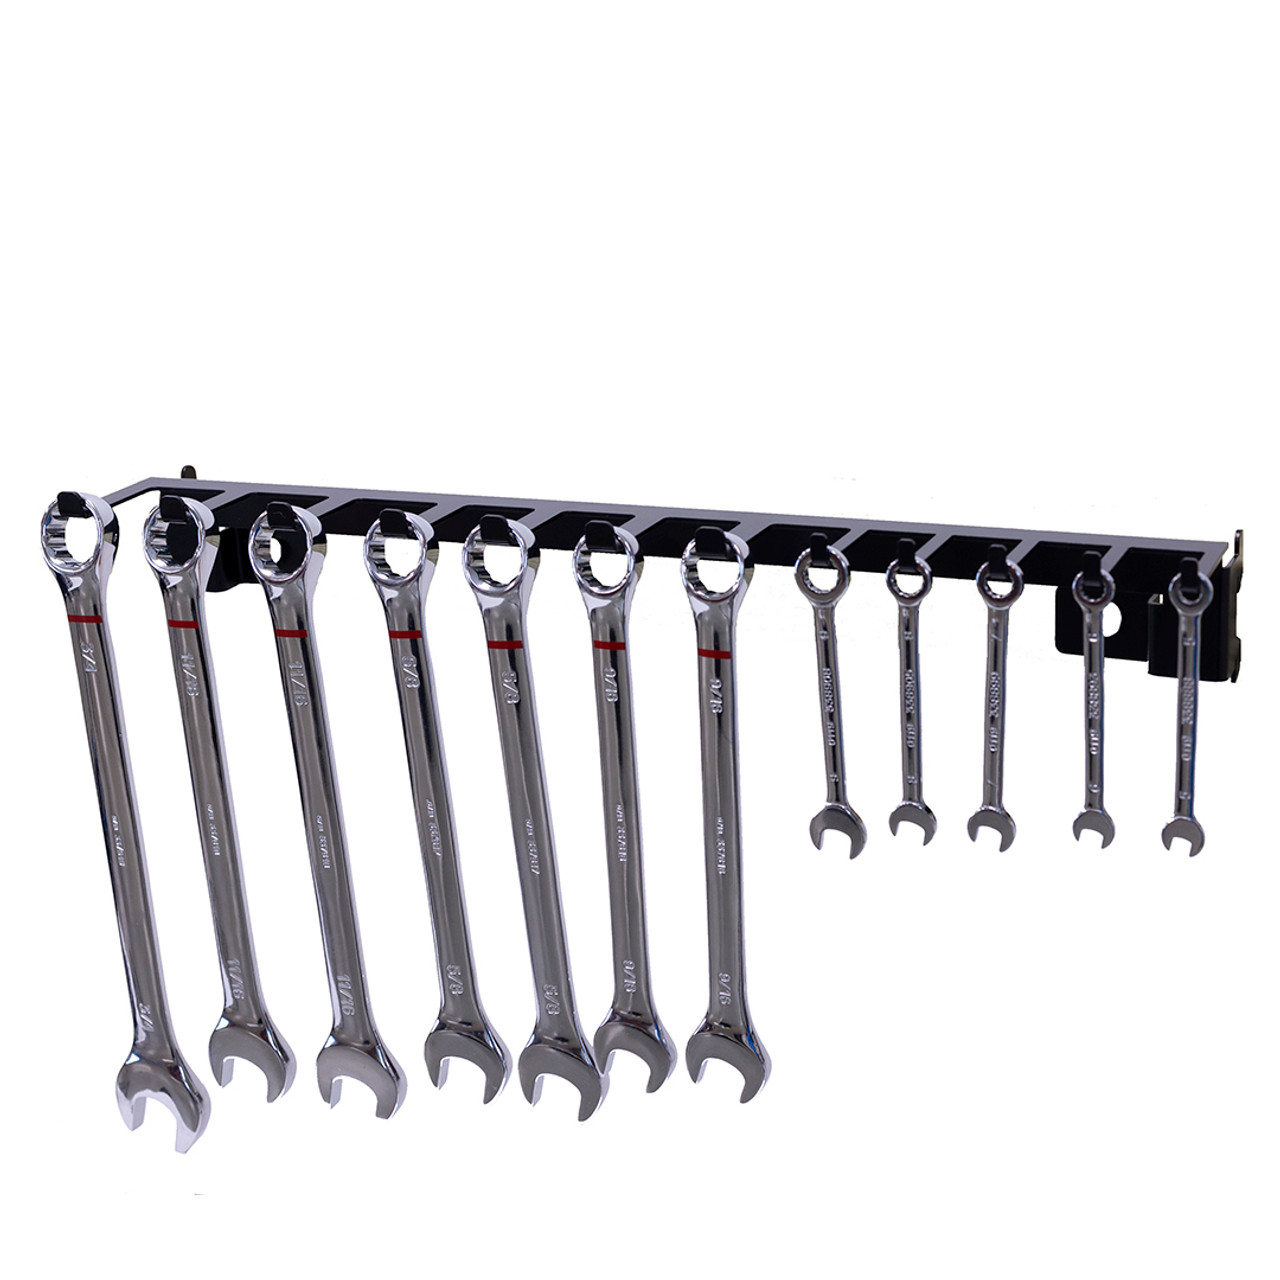 Single Set Wrench Holder - Silver